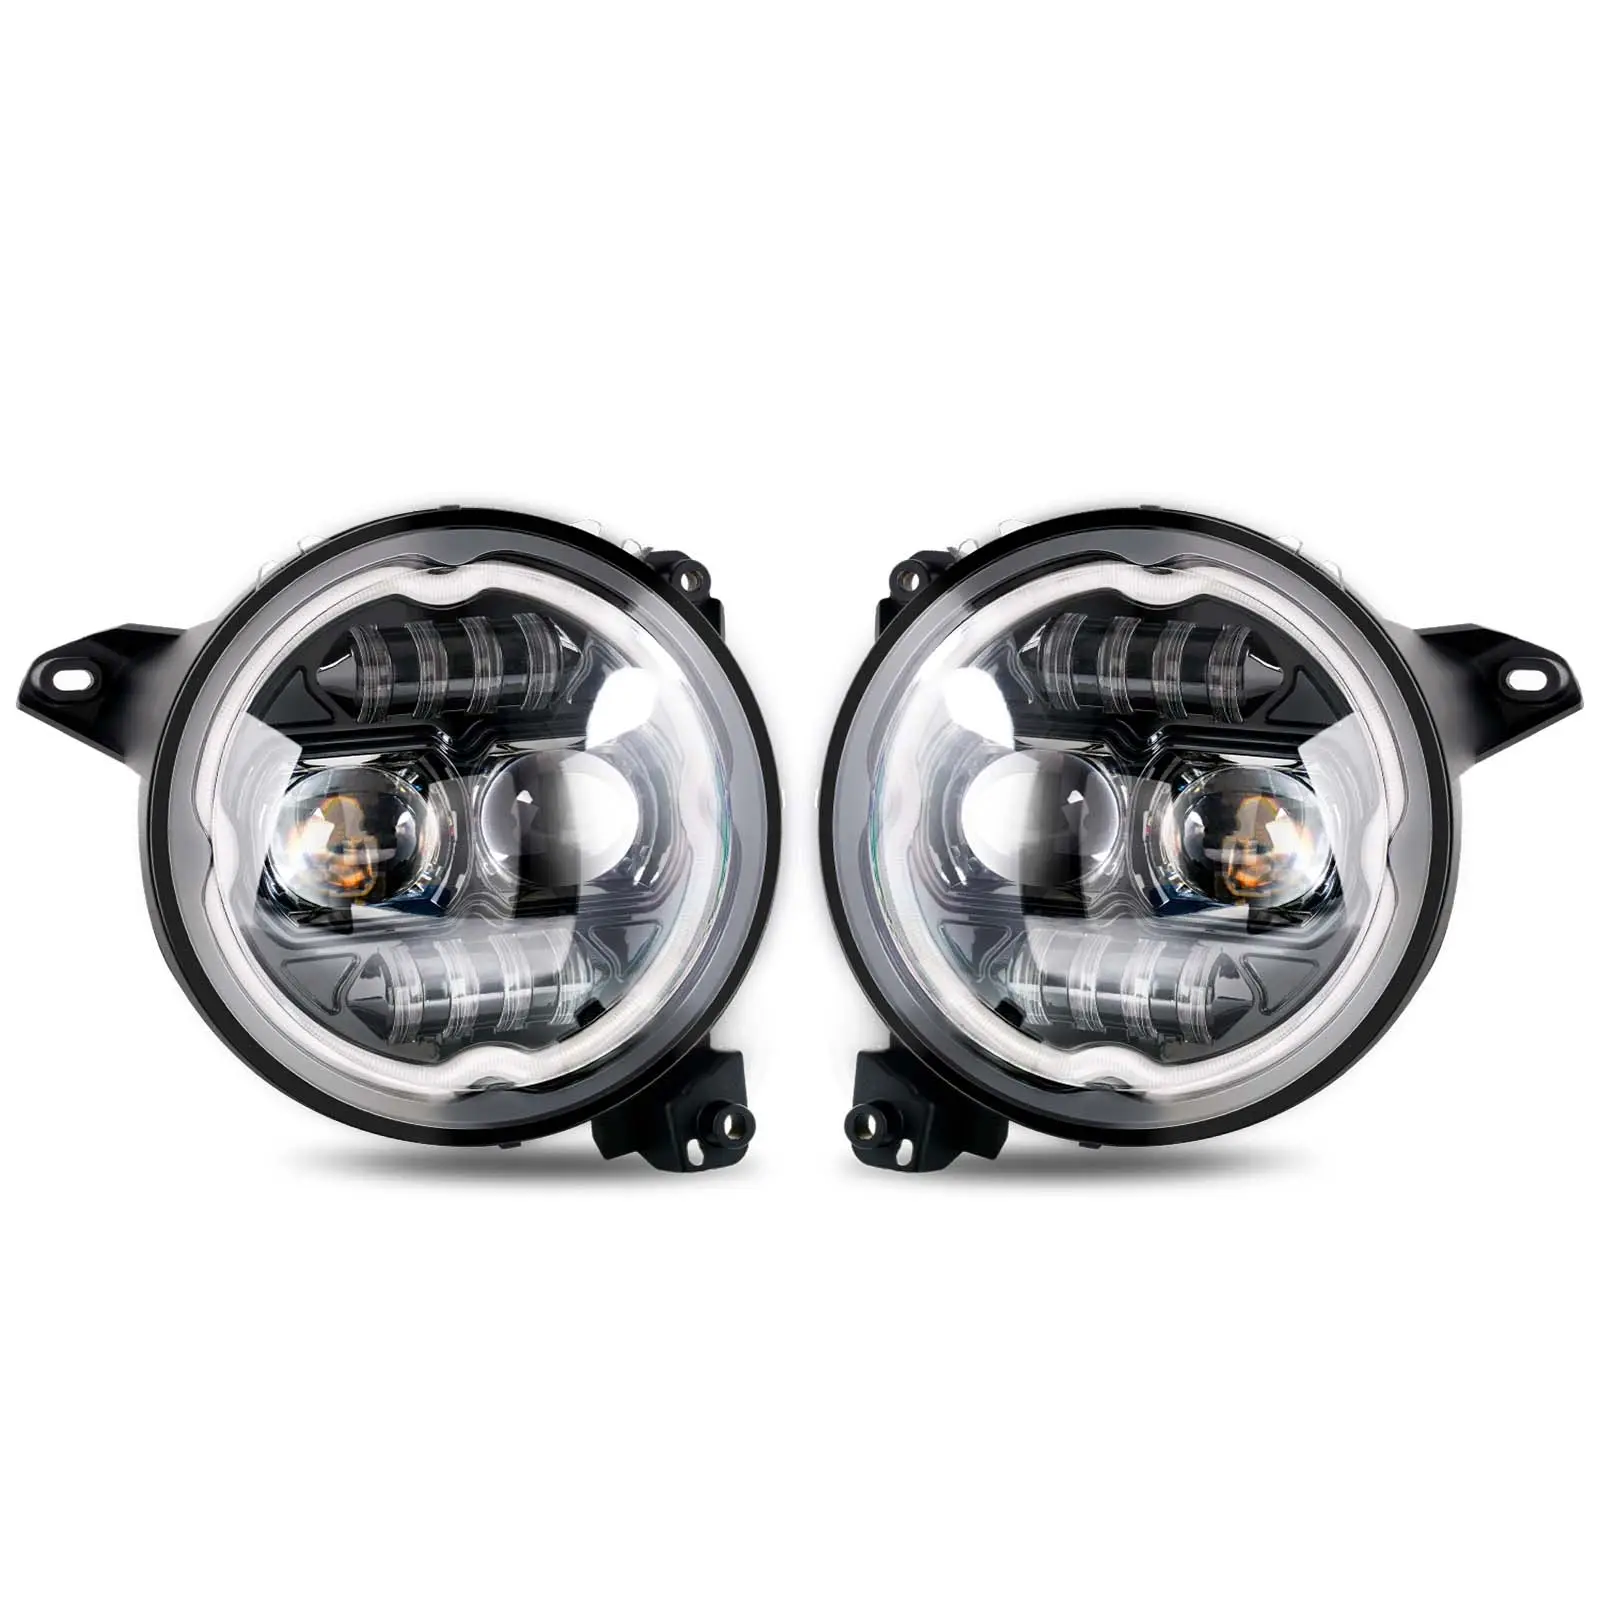 Head Light with Yellow/white Daytime Running Light RGB for Jeep Wrangler JL N2 IP68 PC Lens+aluminum Housing 65W Cree-chips